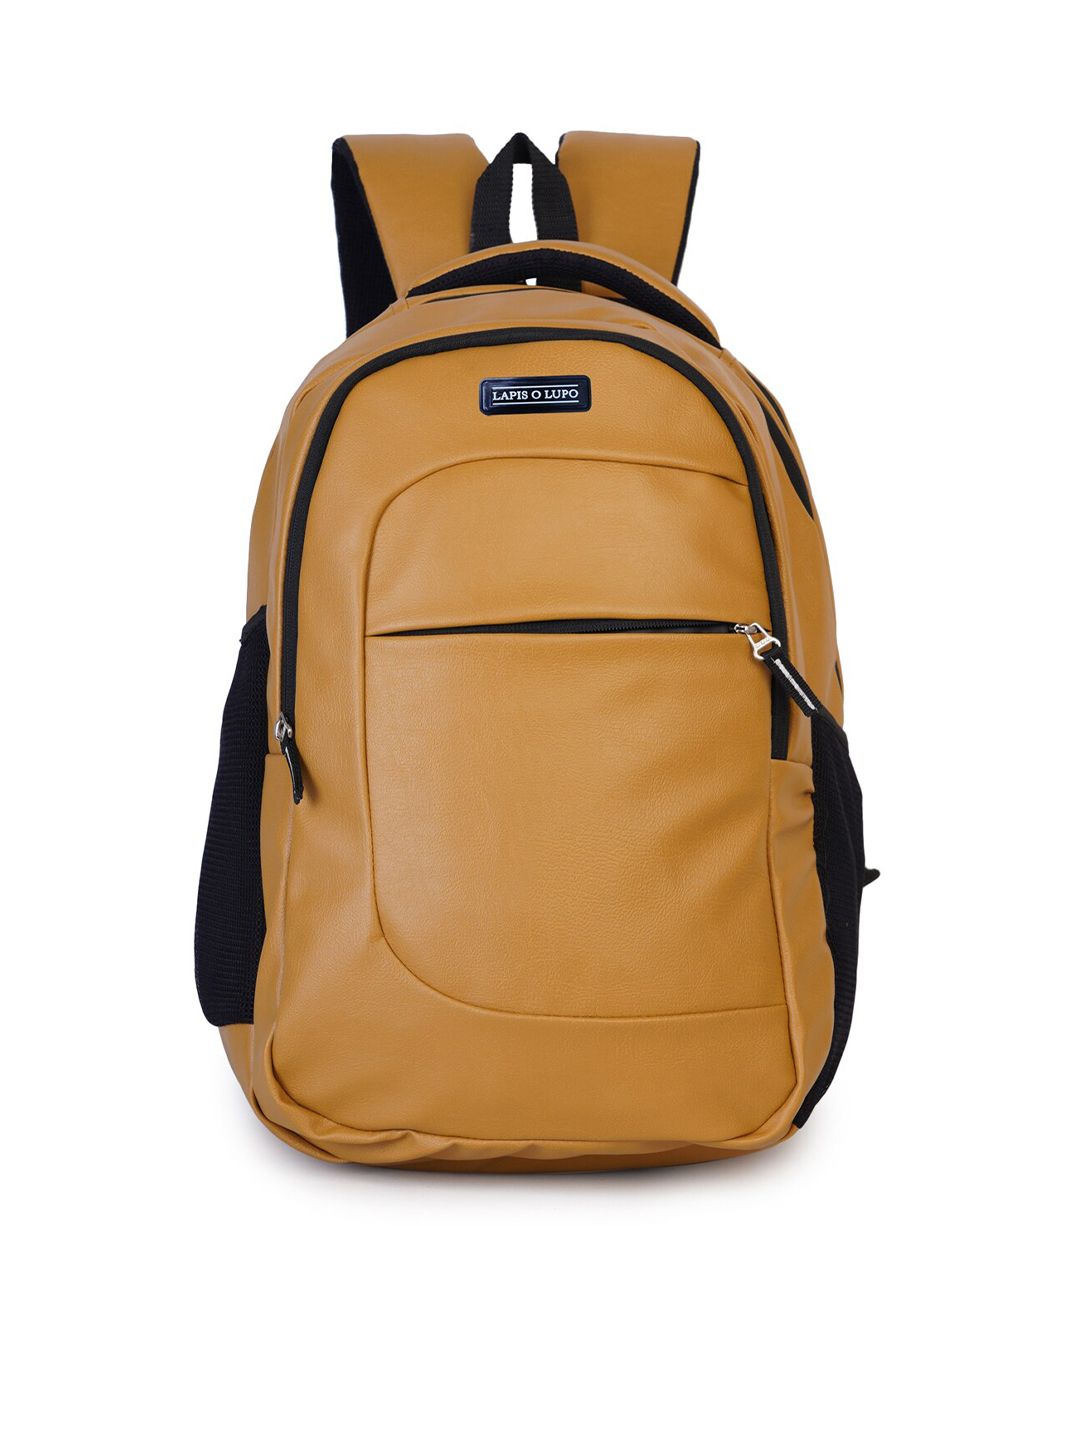 Lapis O Lupo Beige & Black Backpack Price in India